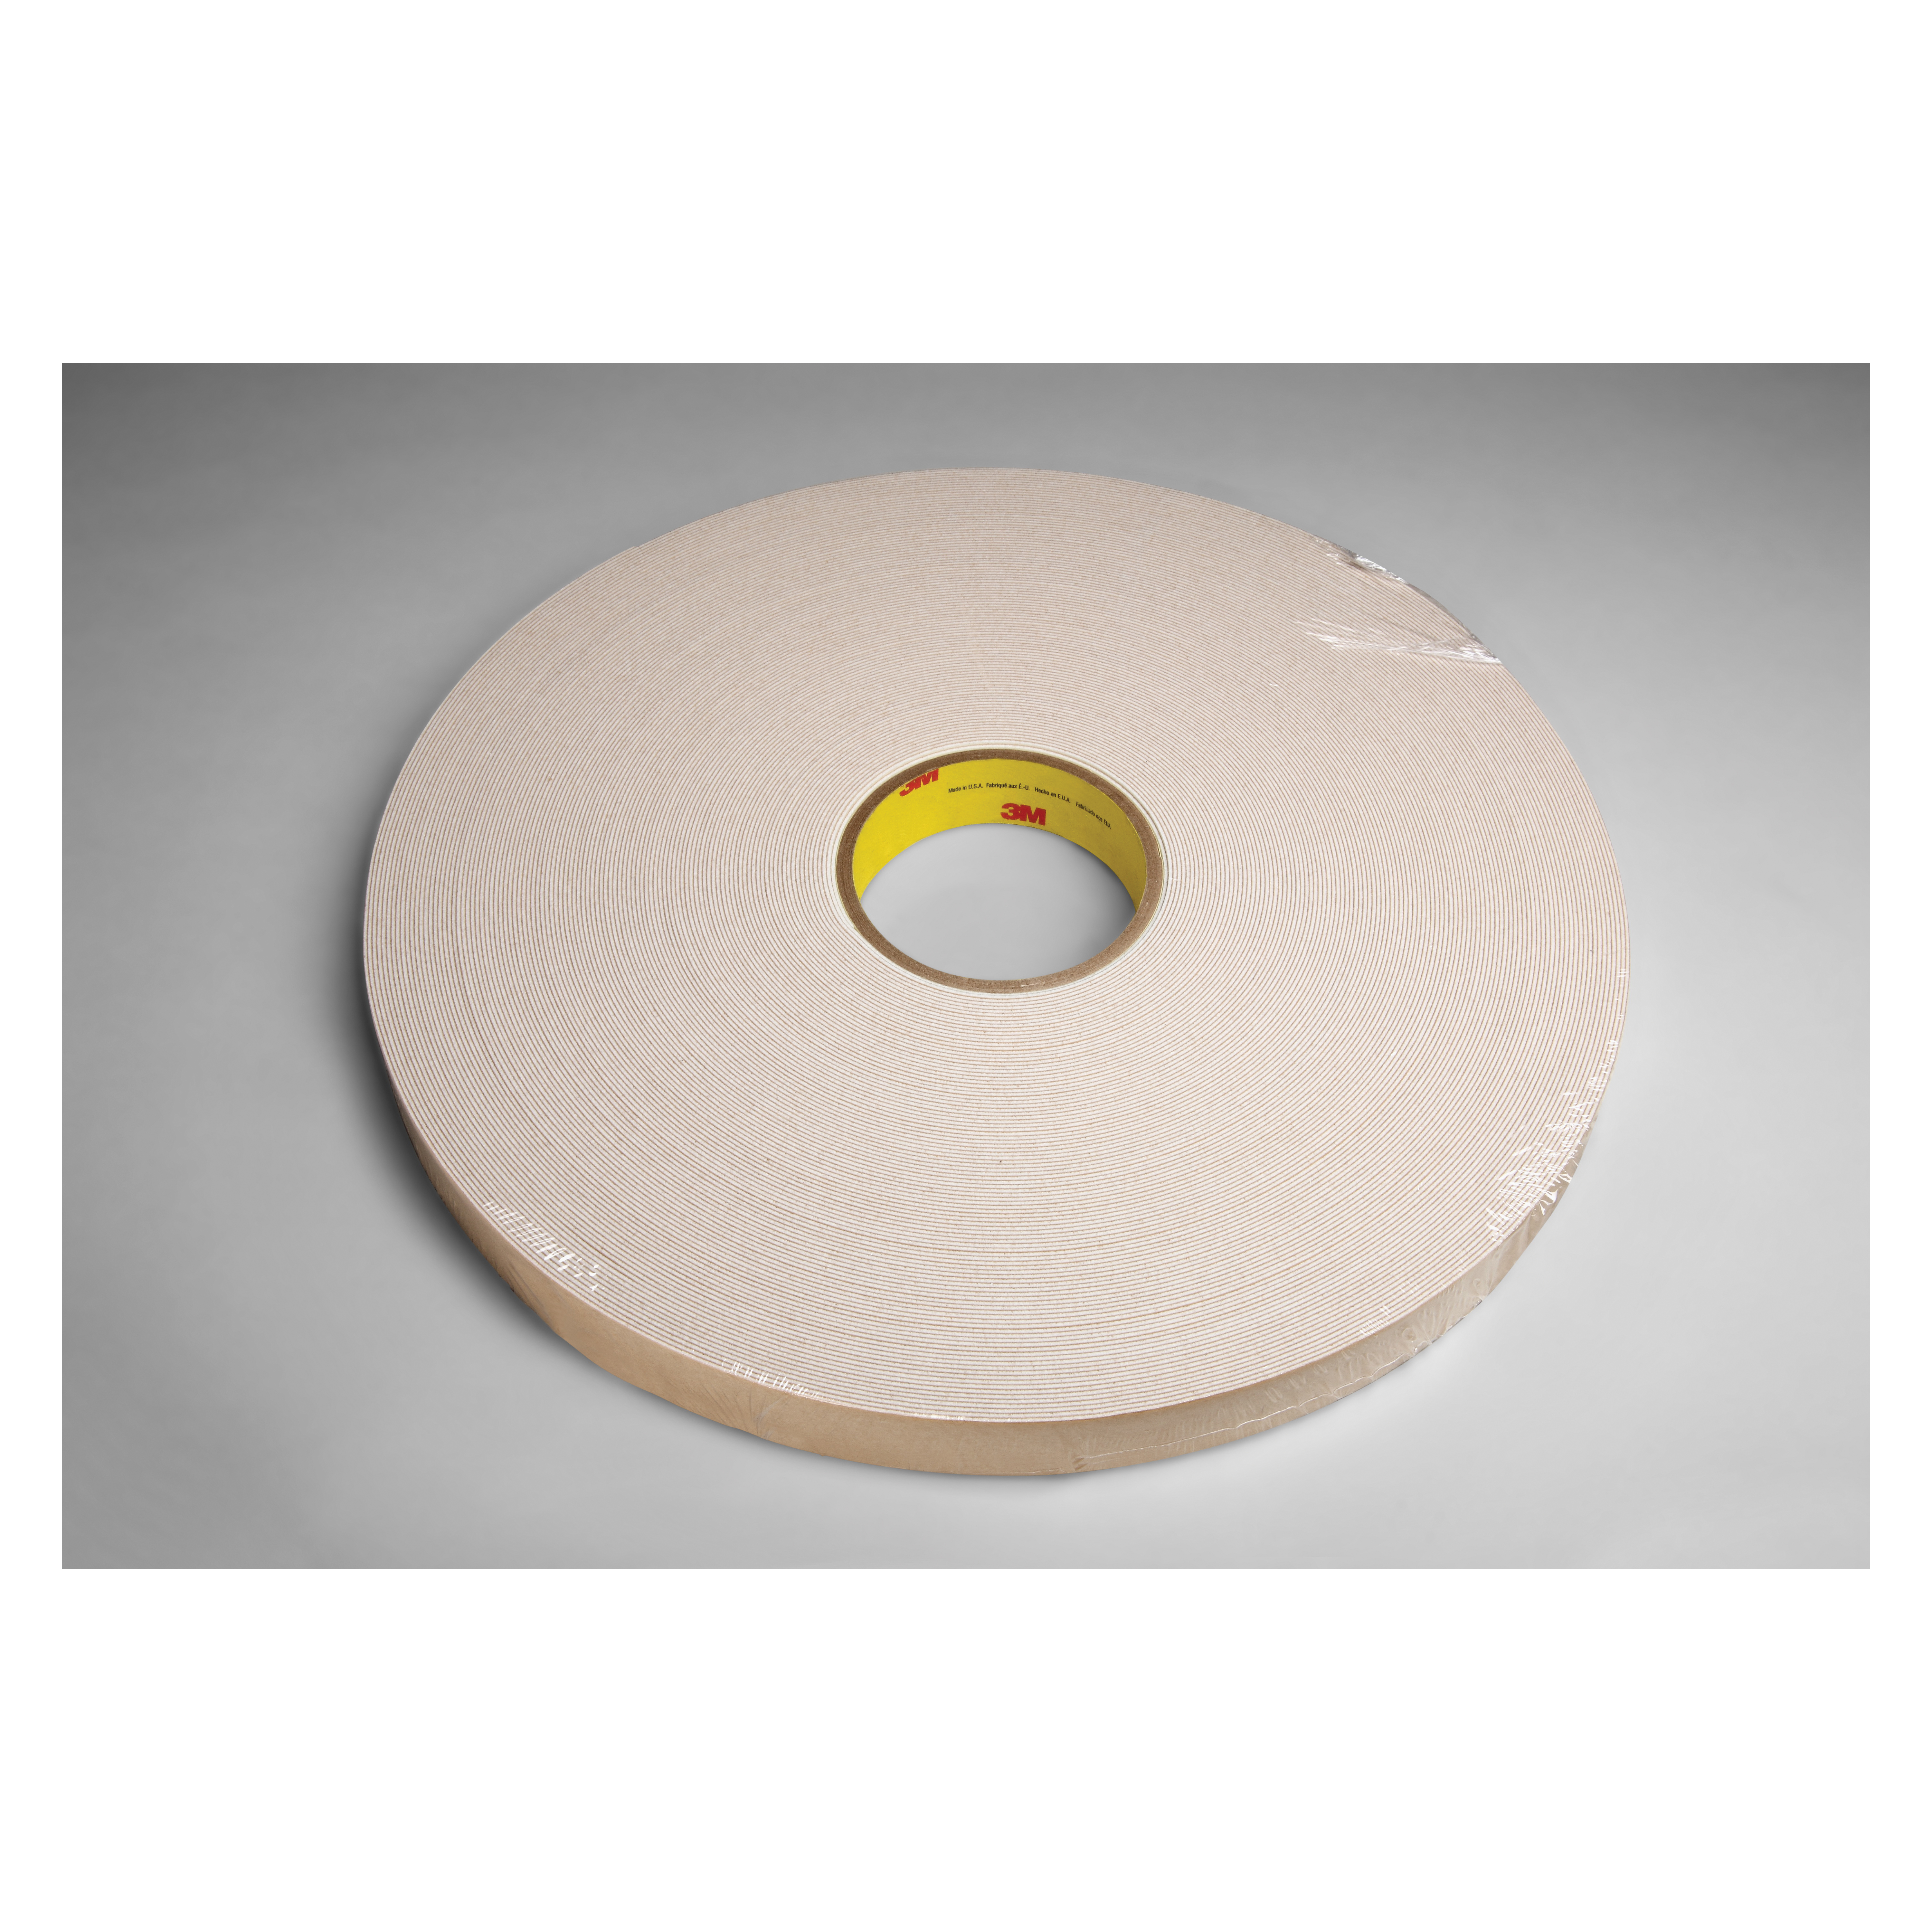 3M™ 021200-17661 Double Coated Tape, 72 yd L x 3/4 in W, 45 mil THK, Rubber Adhesive, Urethane Foam Backing, Natural